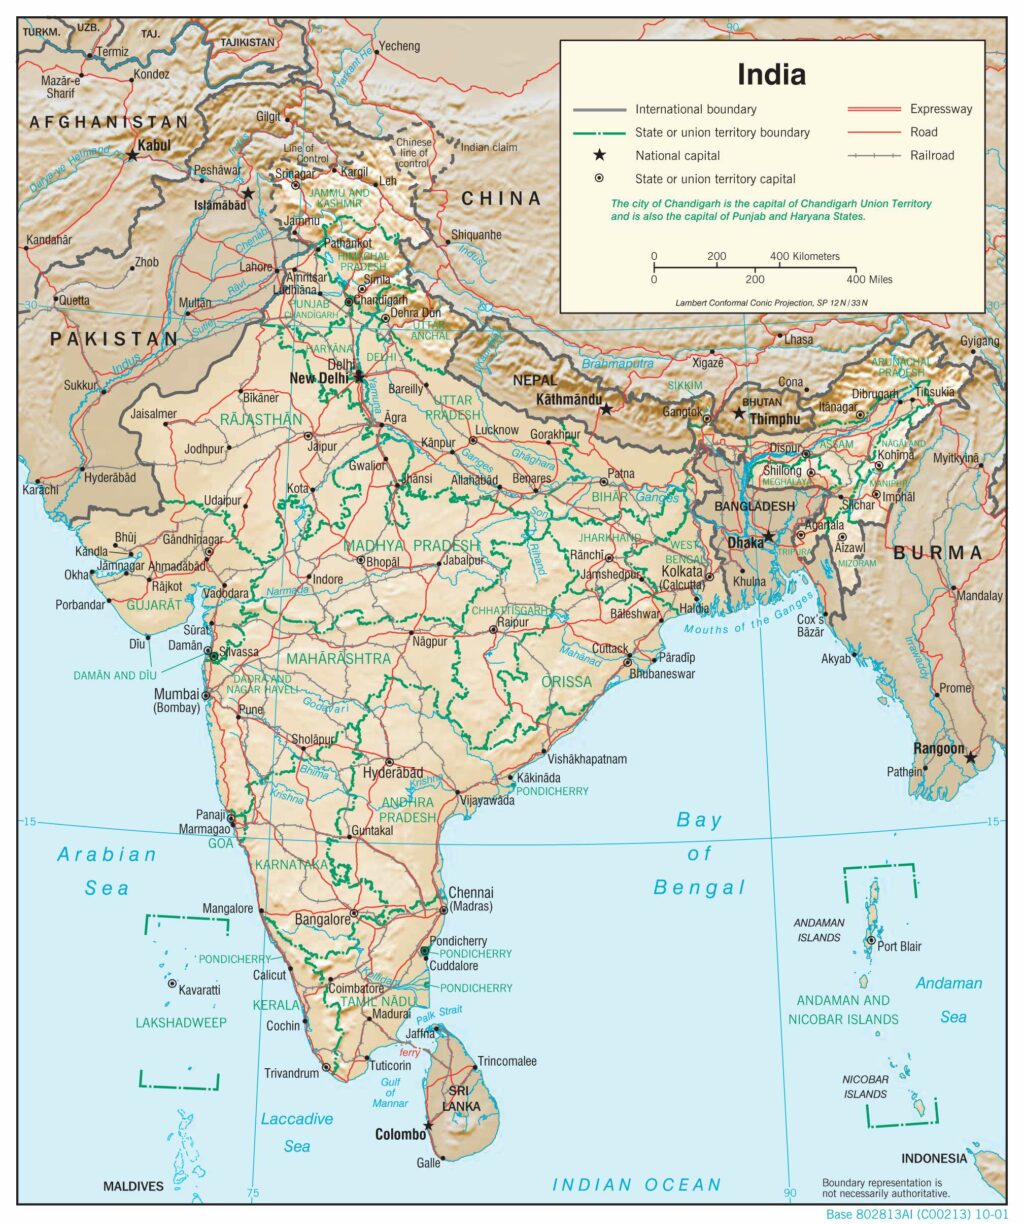 India physiography map.